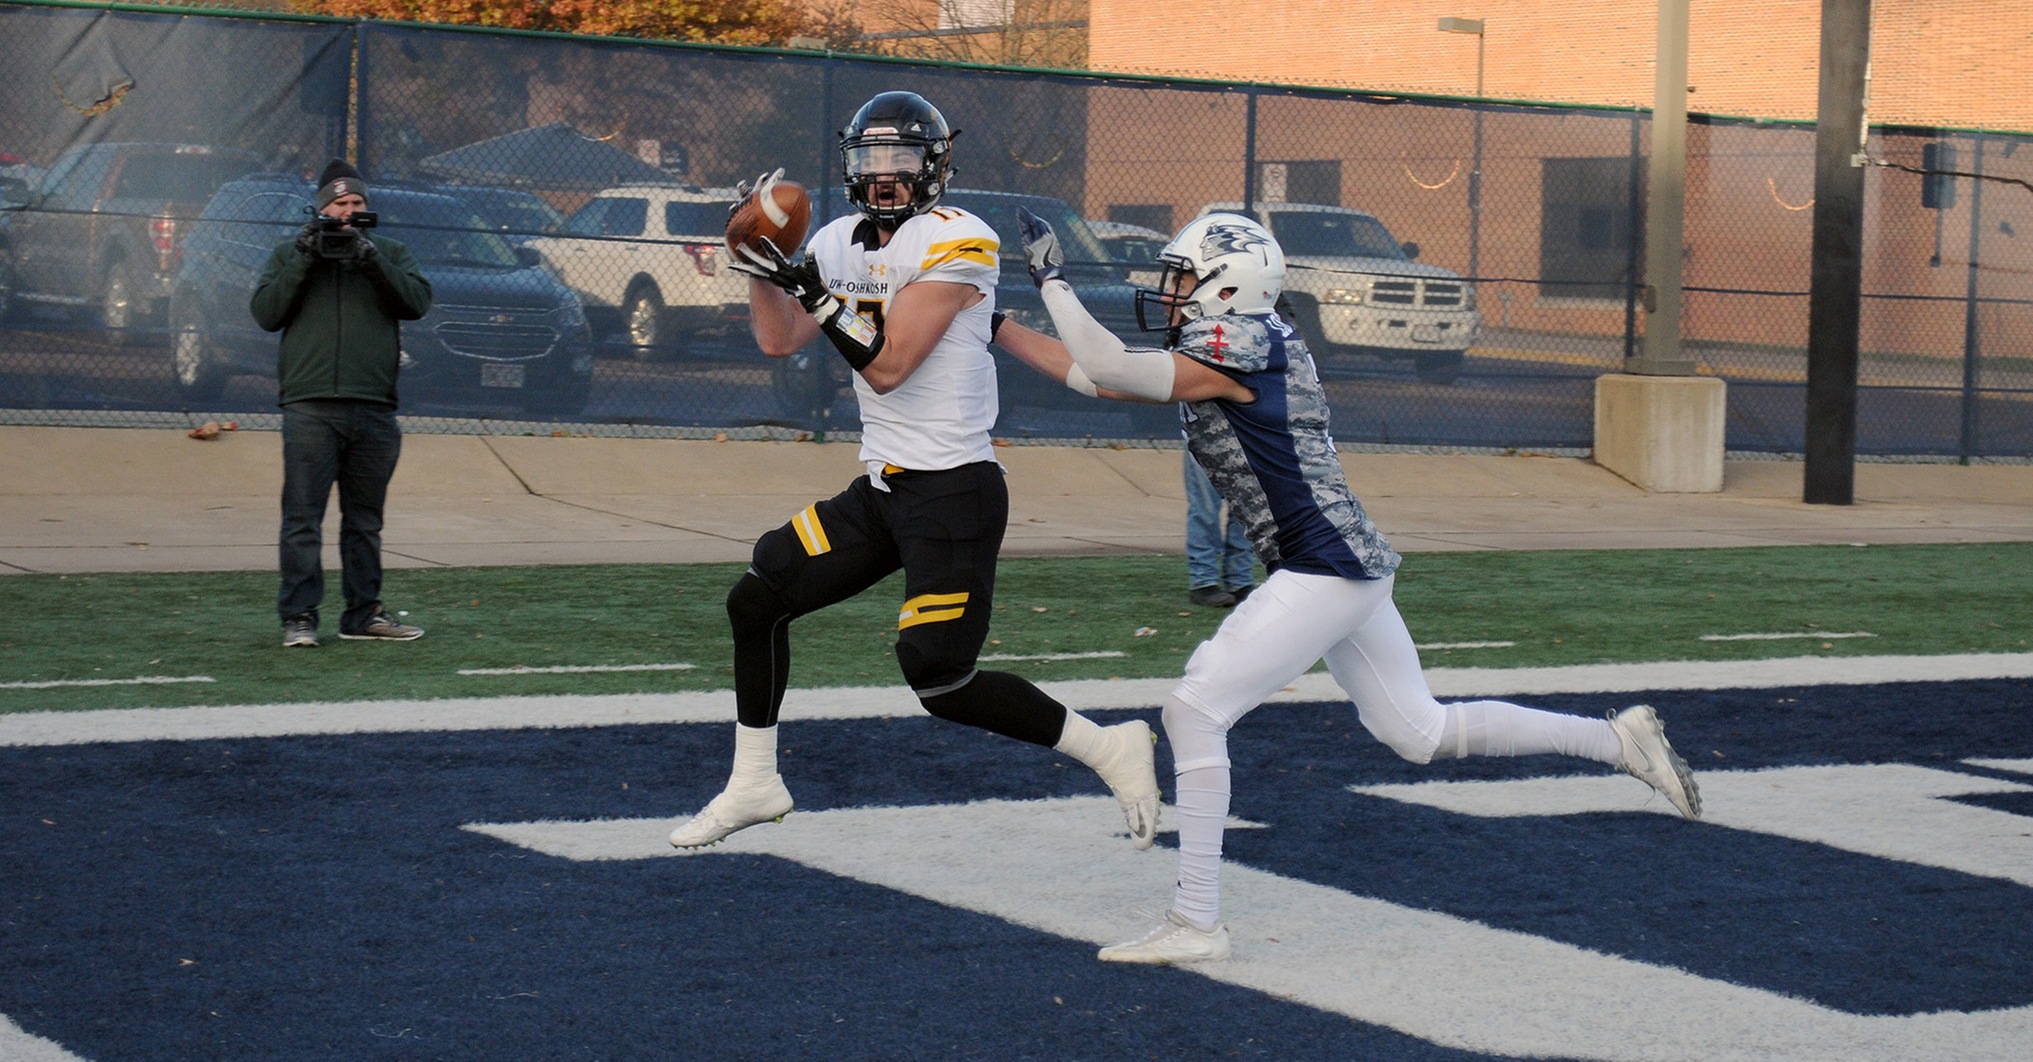 Jacob Grant's second career touchdown reception gave the Titans a 21-0 lead over UW-Stout.